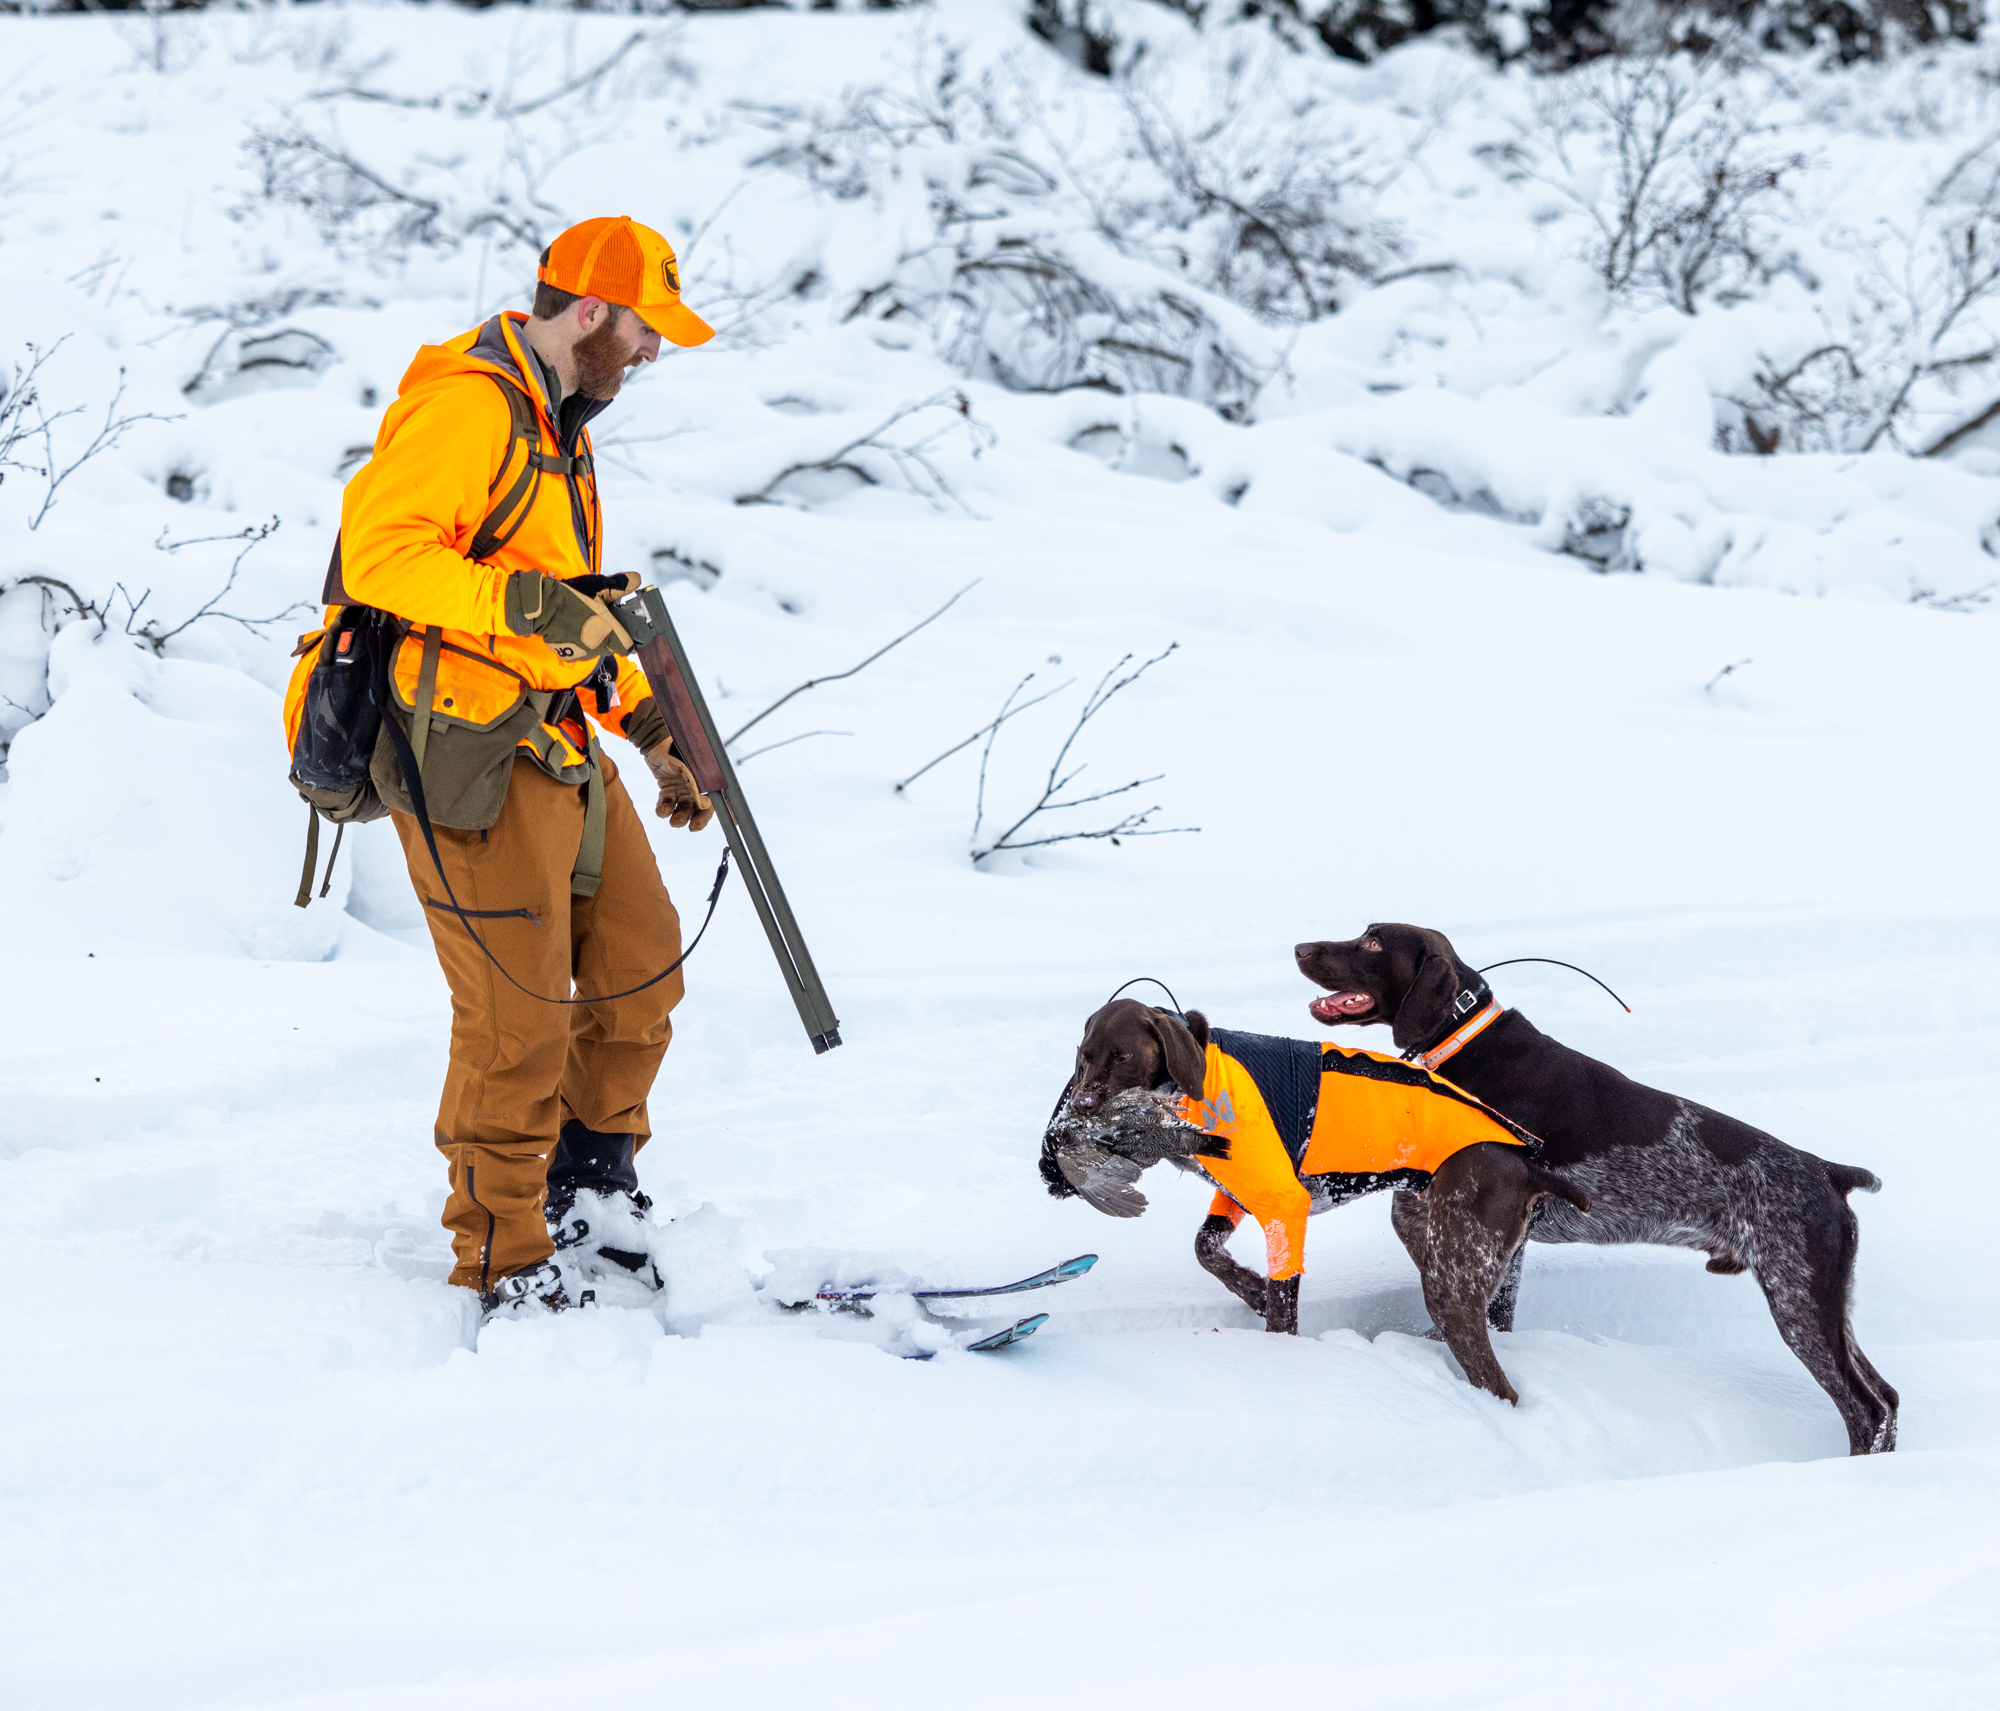 A hunter on skis reaches down for a bird that a dog is retrieving for him.